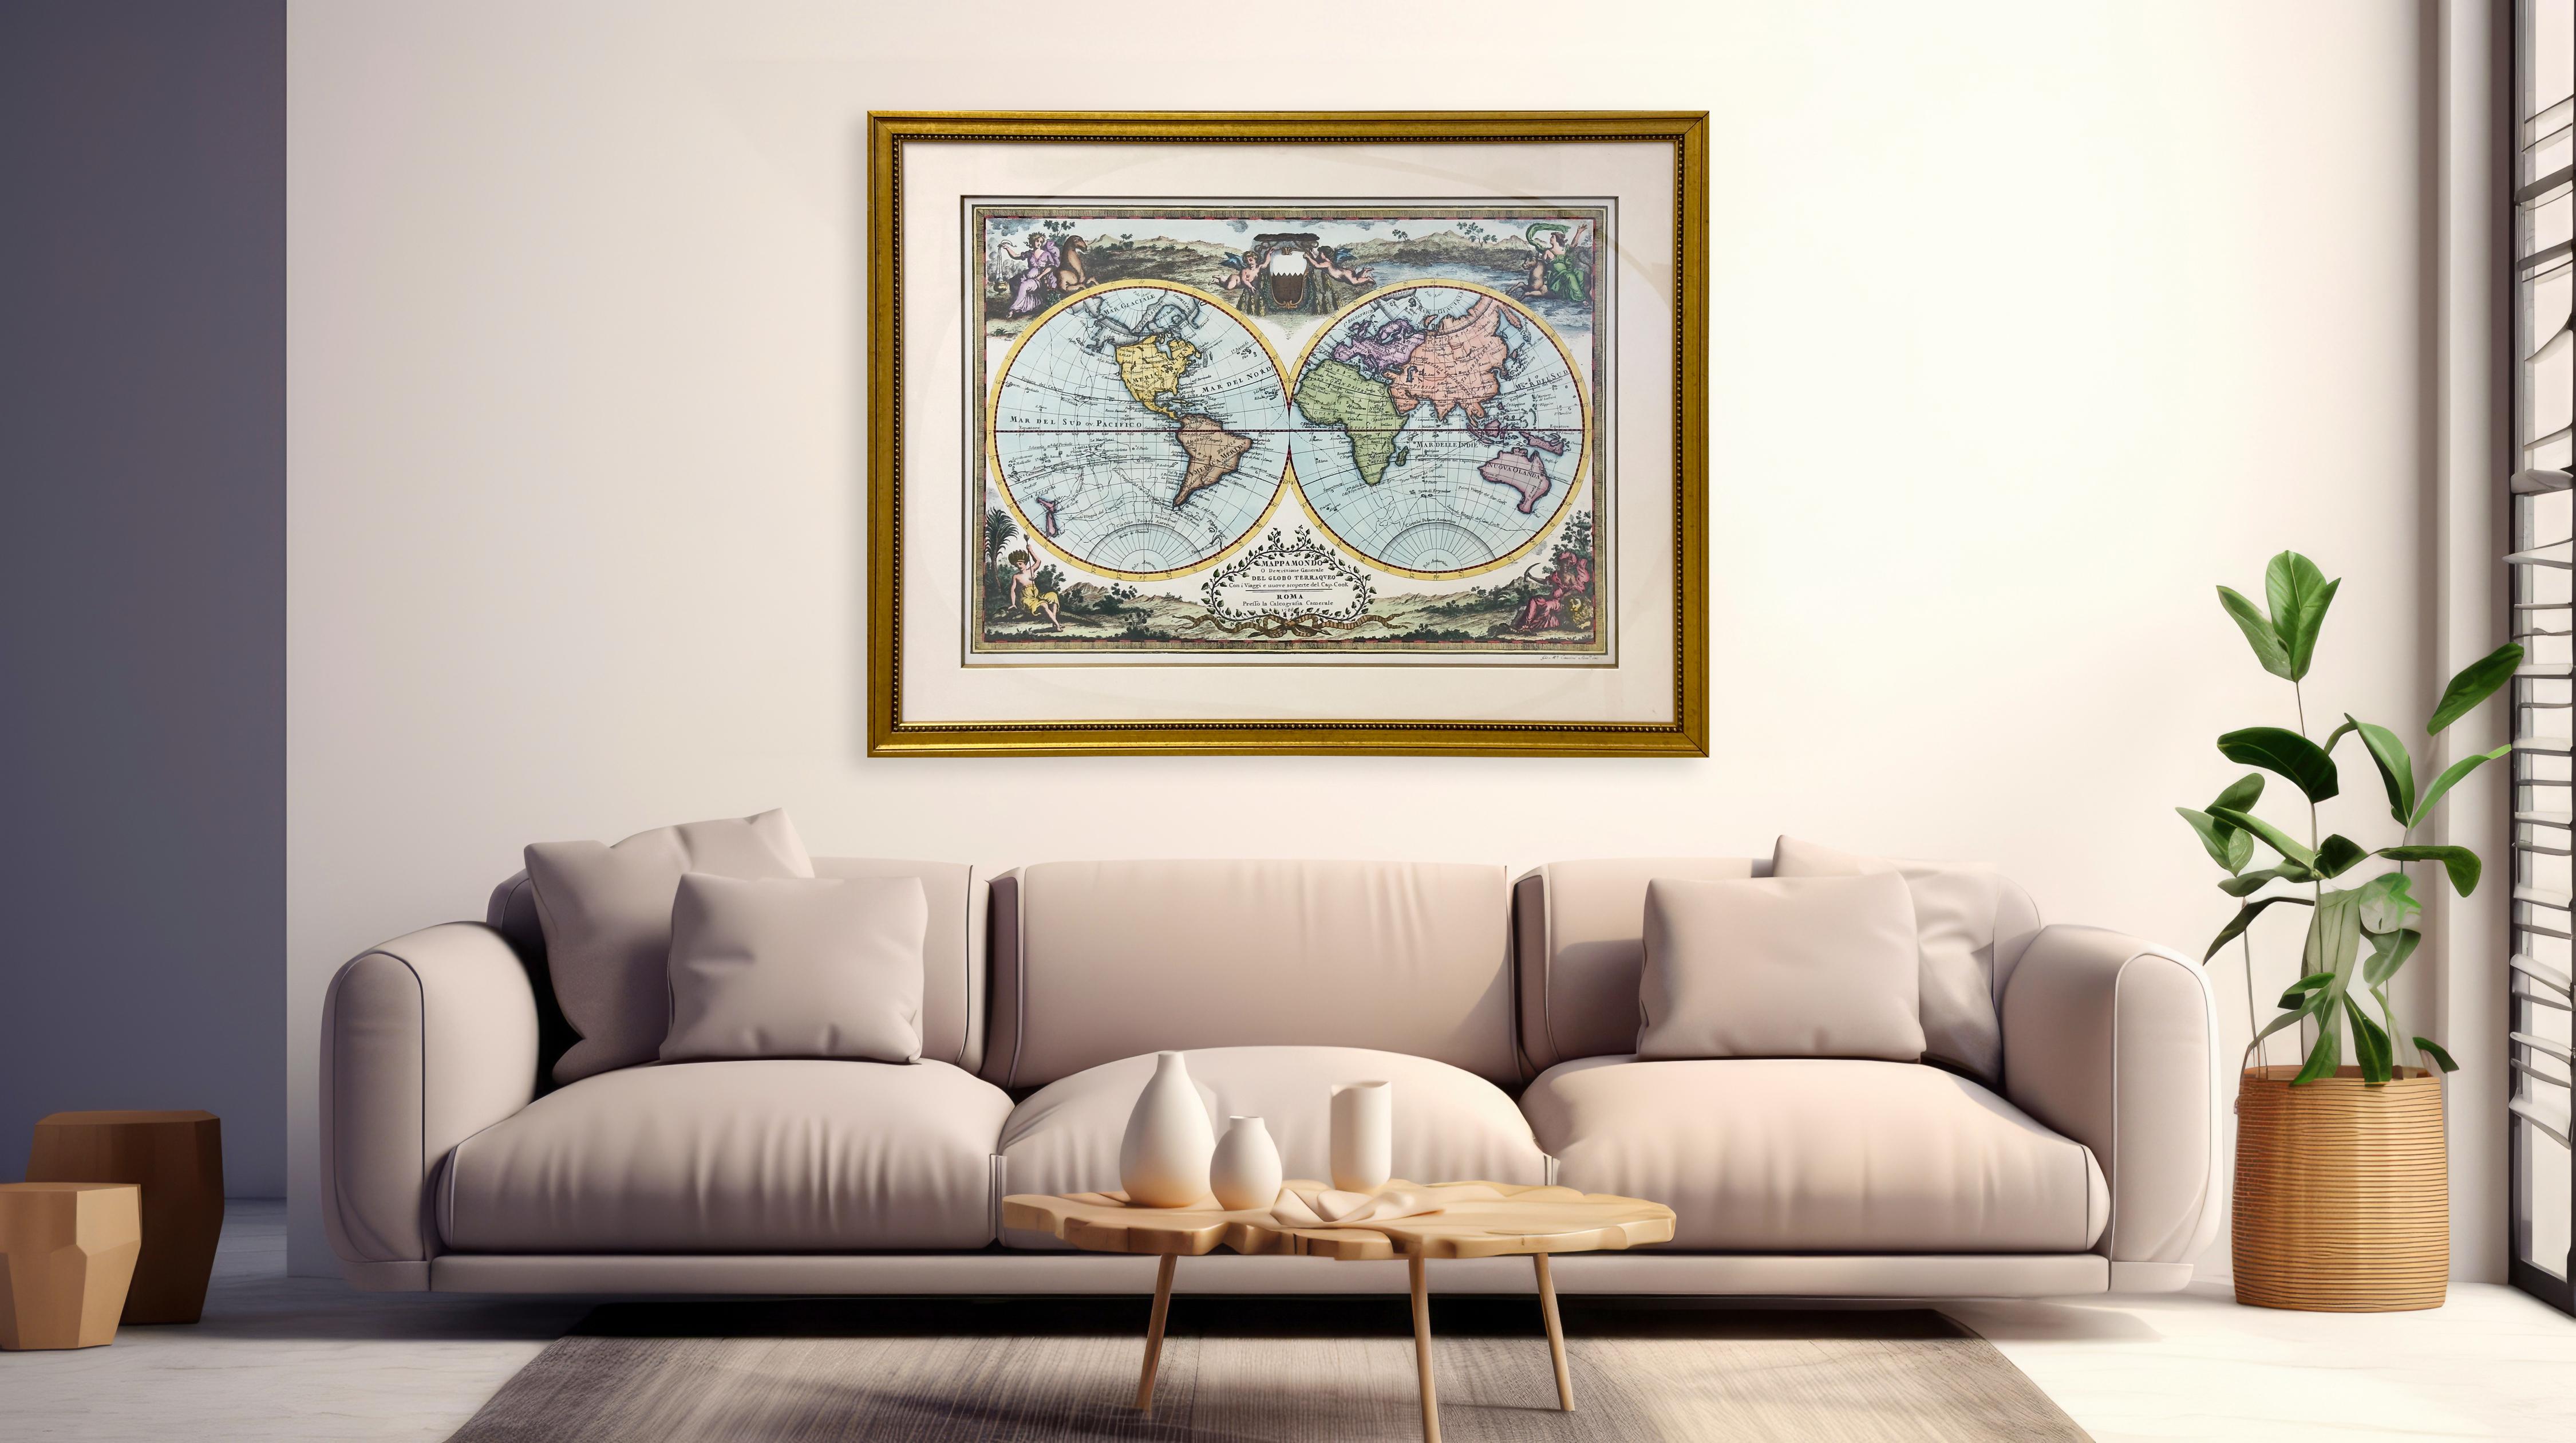 A double hemisphere old world map print. The map is a reproduction of the original of the 1788 Mapa Mondo made in Rome Italy. The map is decorated with cherubs , angels and demons with a garden scenery framing the double round maps.  The old world